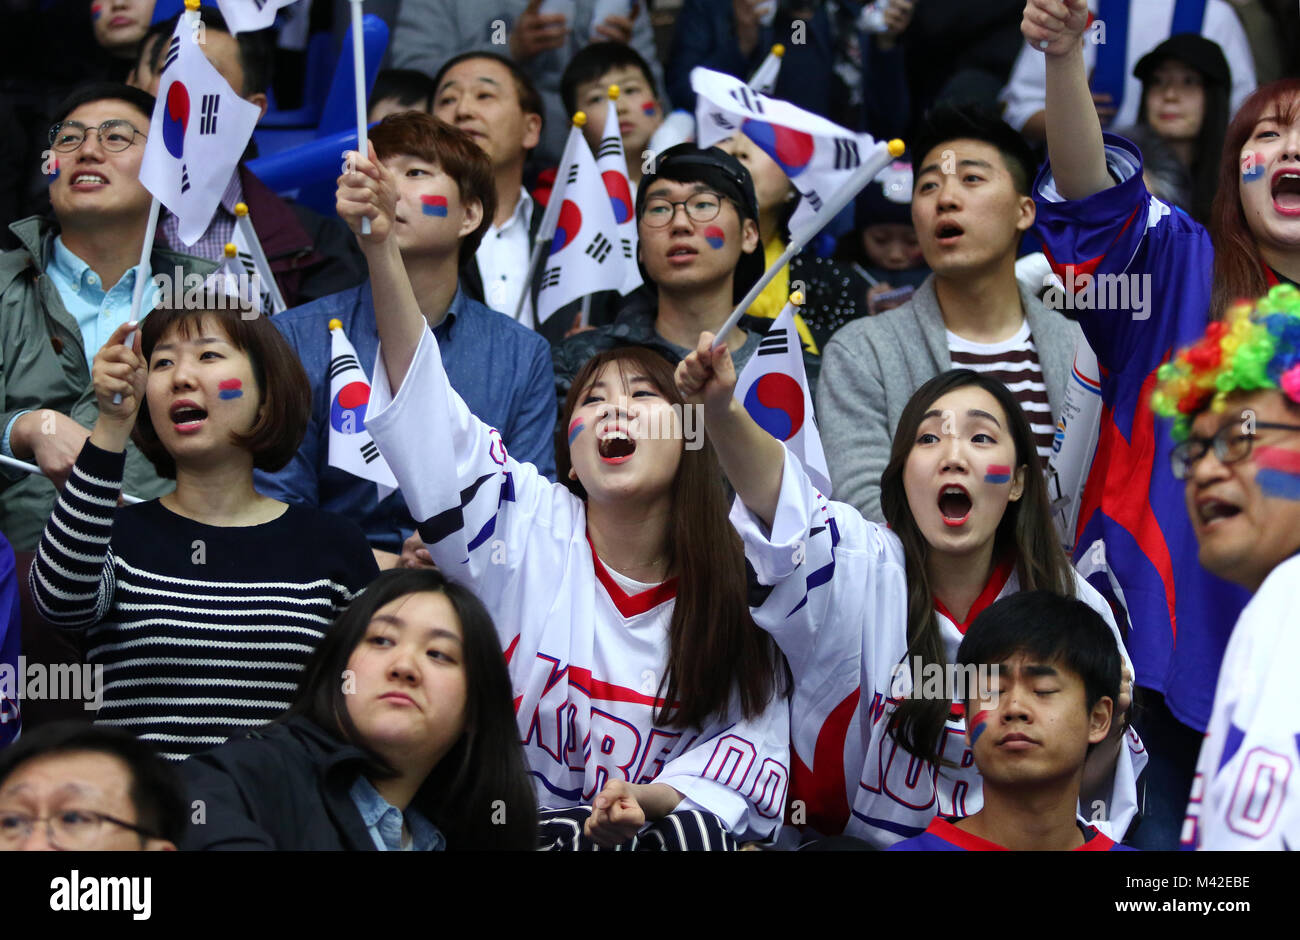 KYIV, UKRAINE - APRIL 28, 2017: South Korean fans show their support during IIHF 2017 Ice Hockey World Championship Div 1 Group A game against Ukraine Stock Photo